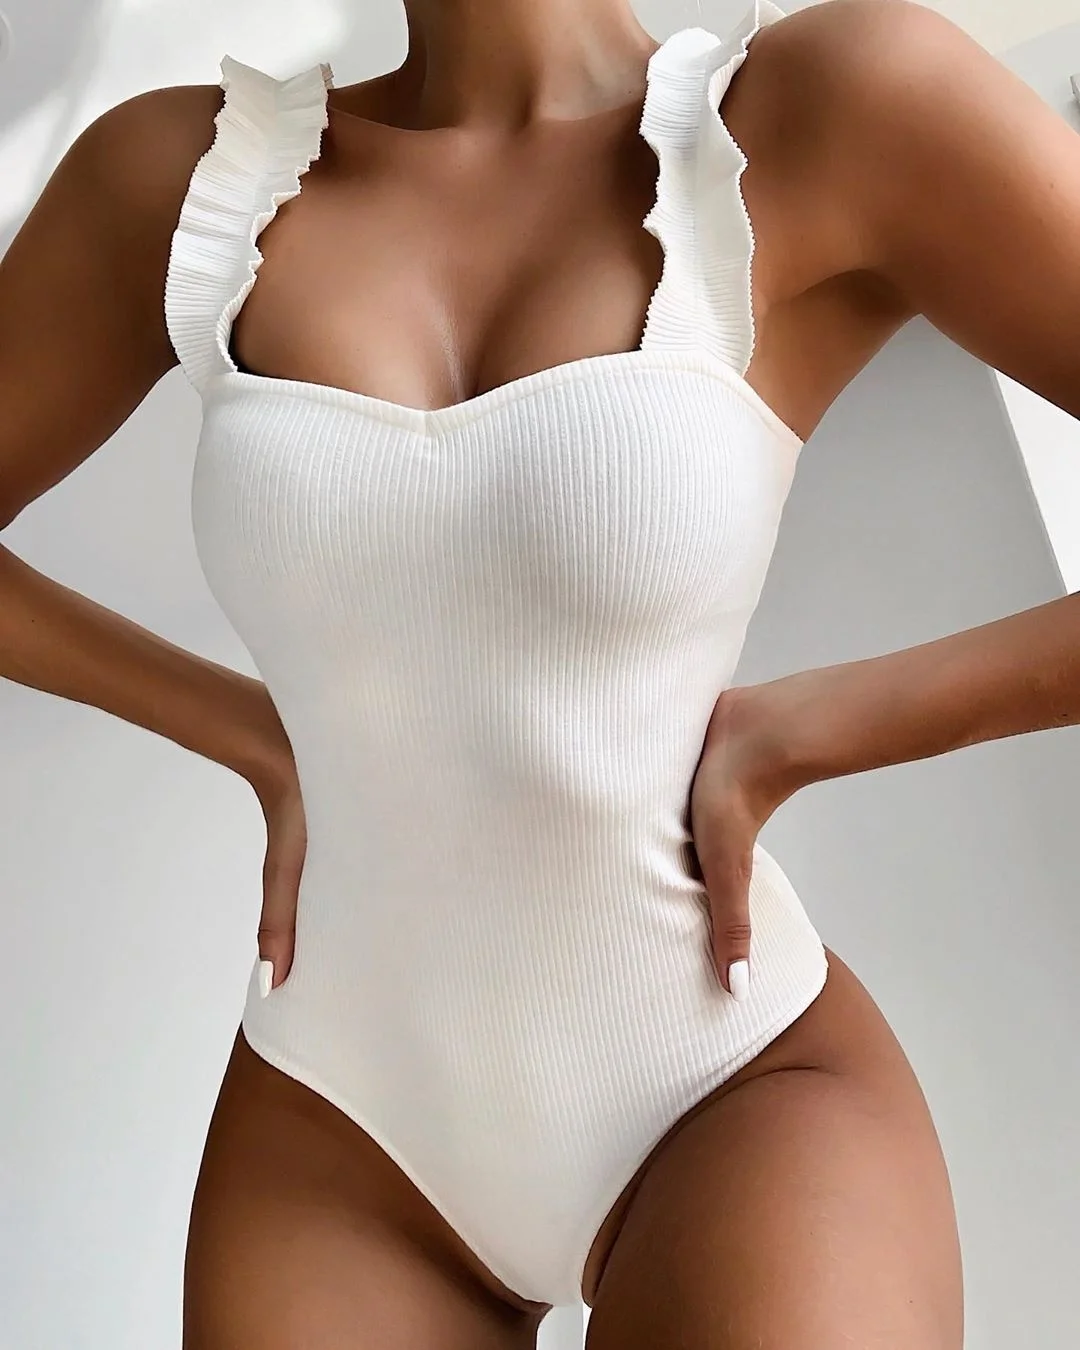 

RX-9306 New fashion woman one piece solid swimsuit knit bikini luxury swimsuits 2021, As picture shows or customized color